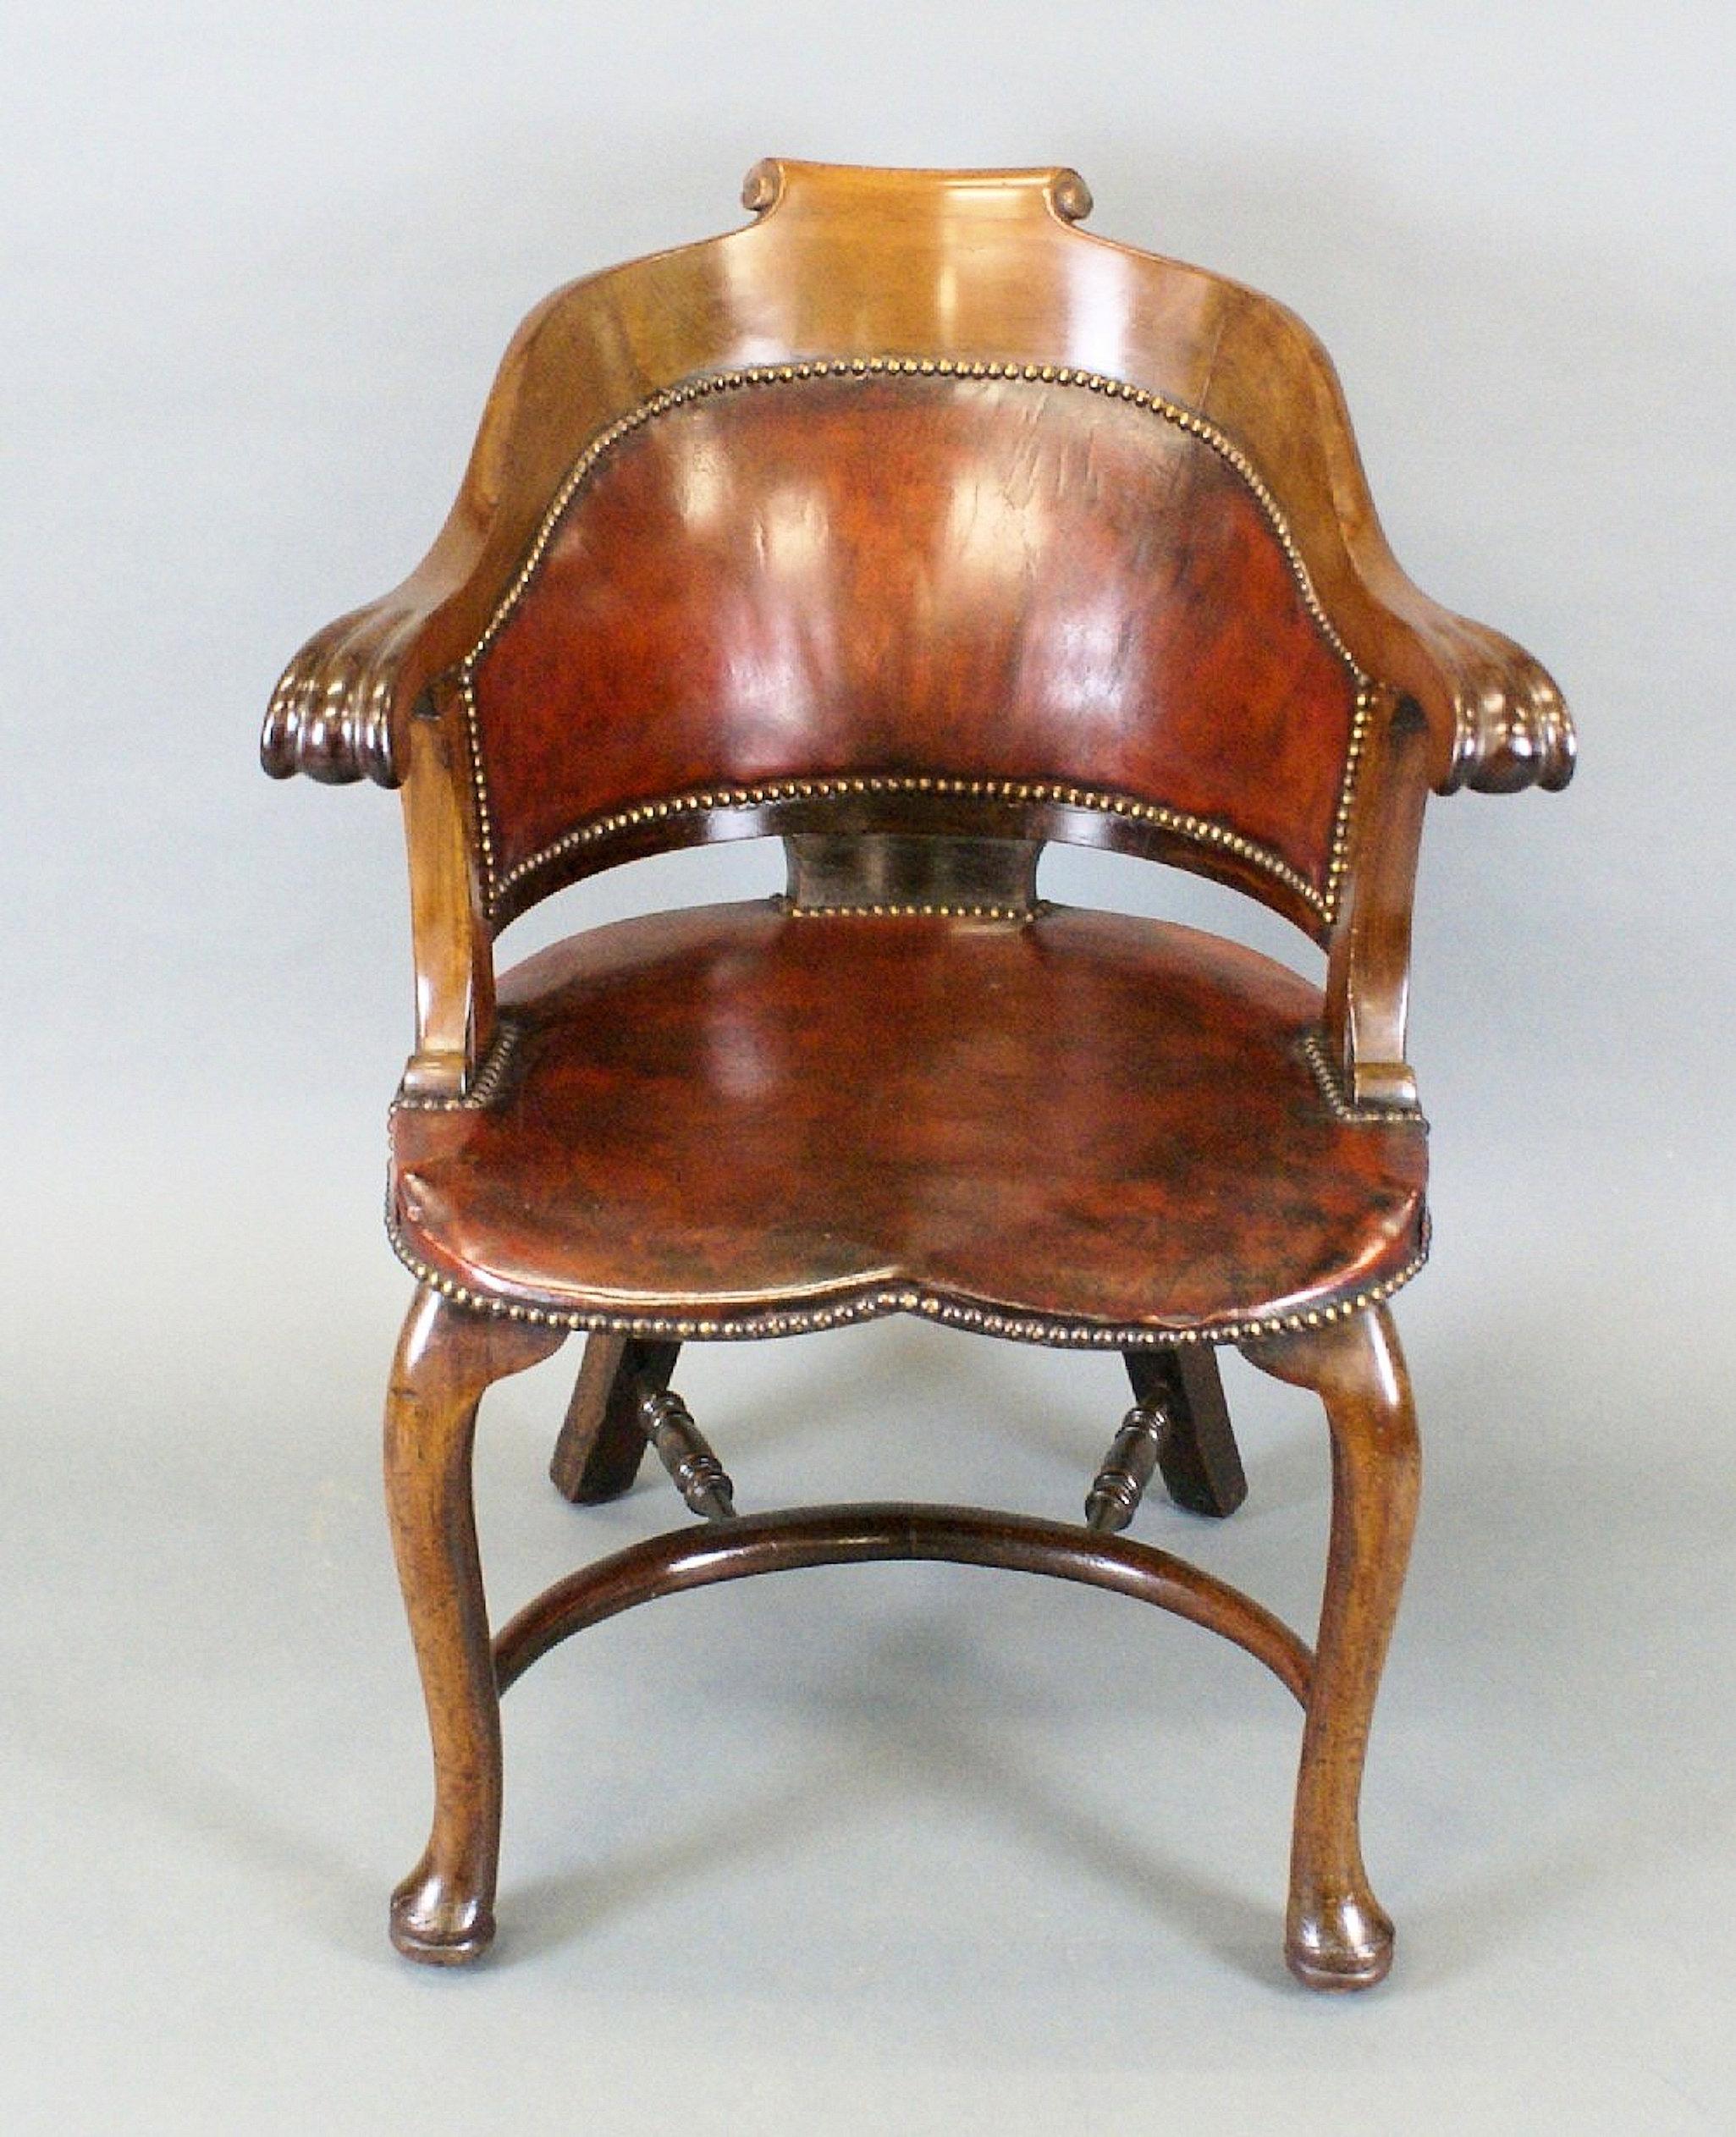 This very handsome and well made English turn of the century armchair is made up of Walnut and a rich cognac brown leather upholstery. It features a shaped, curved back with scrolled arms. It is raised on cabriole front and swept back legs 
united